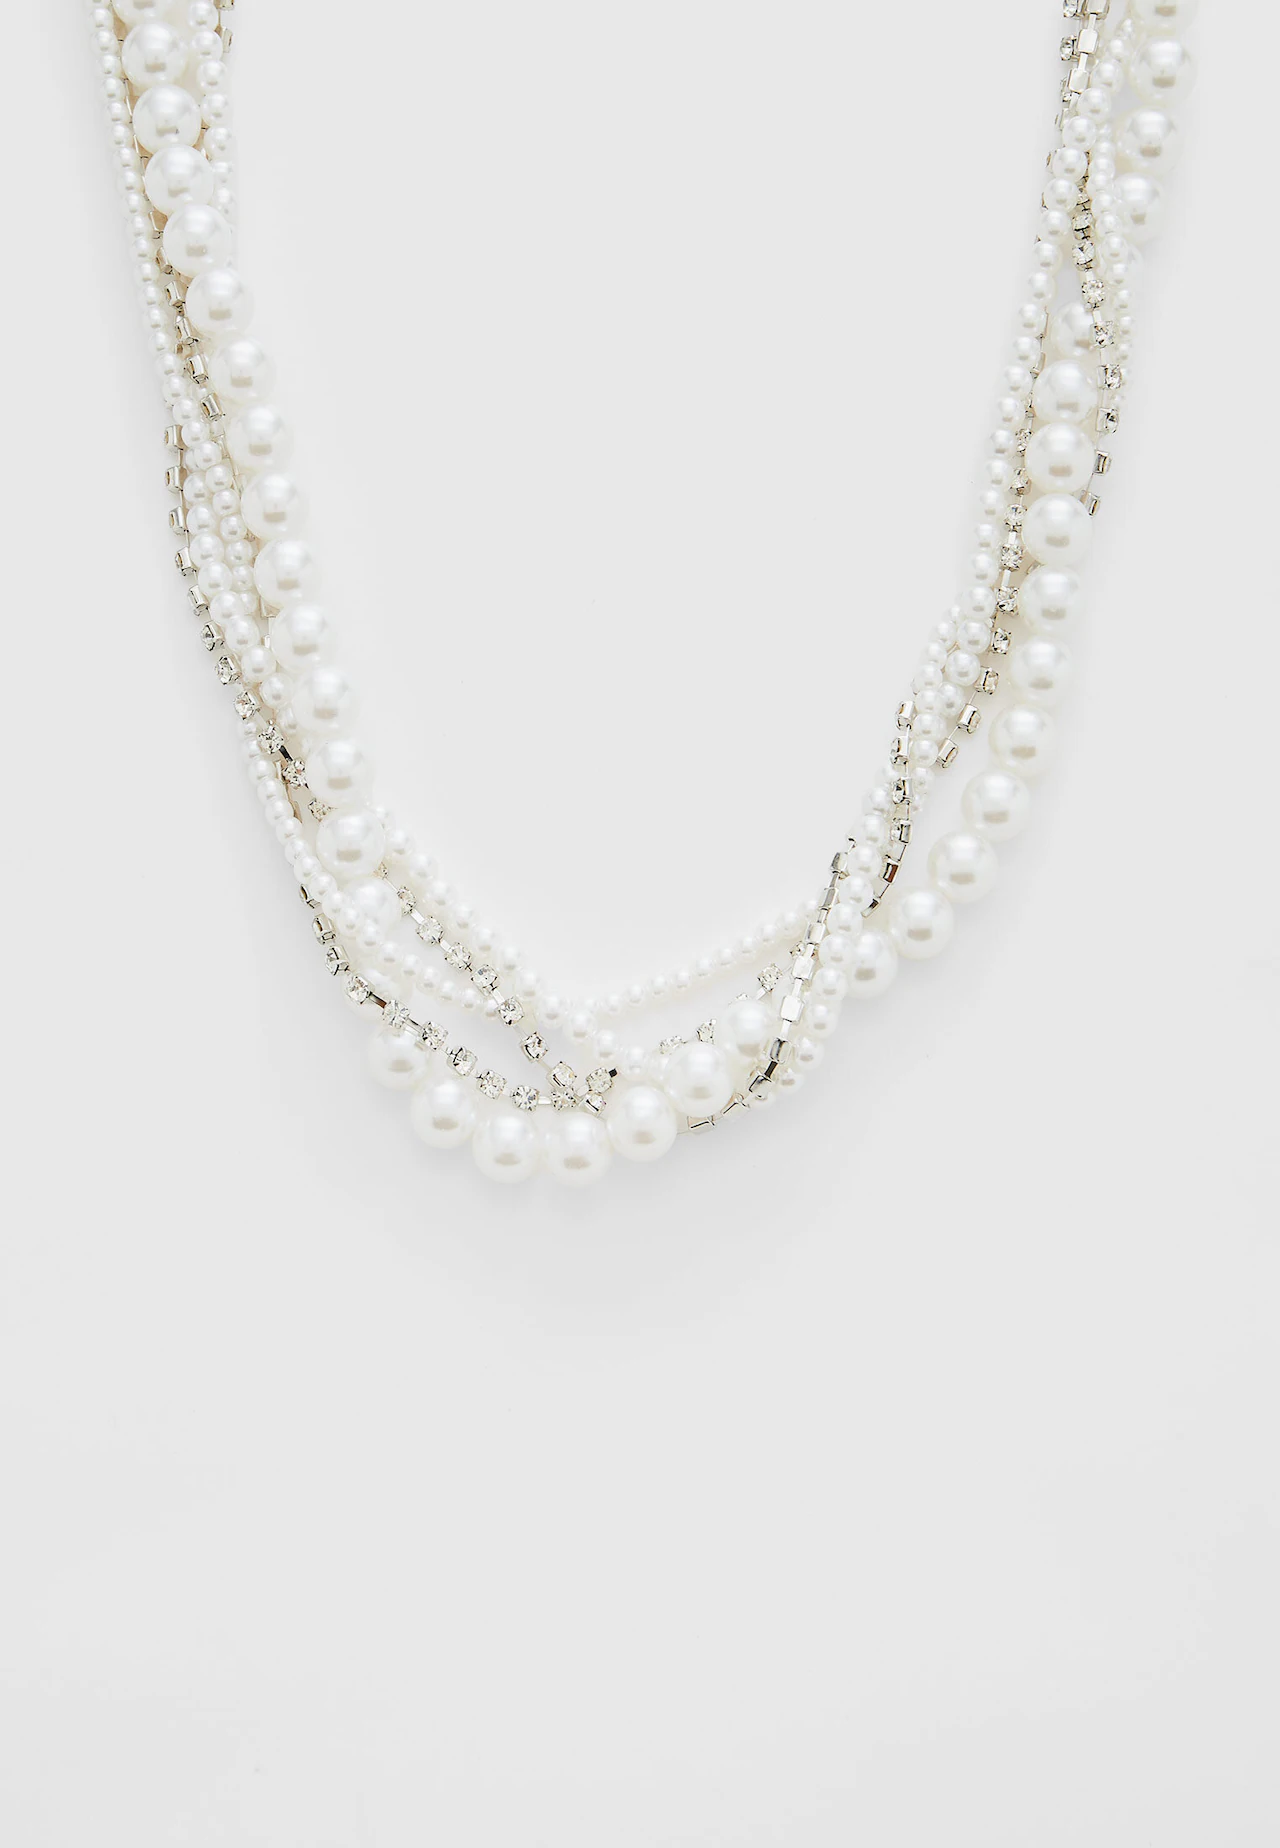 Faux pearl and rhinestone necklace - Women's fashion